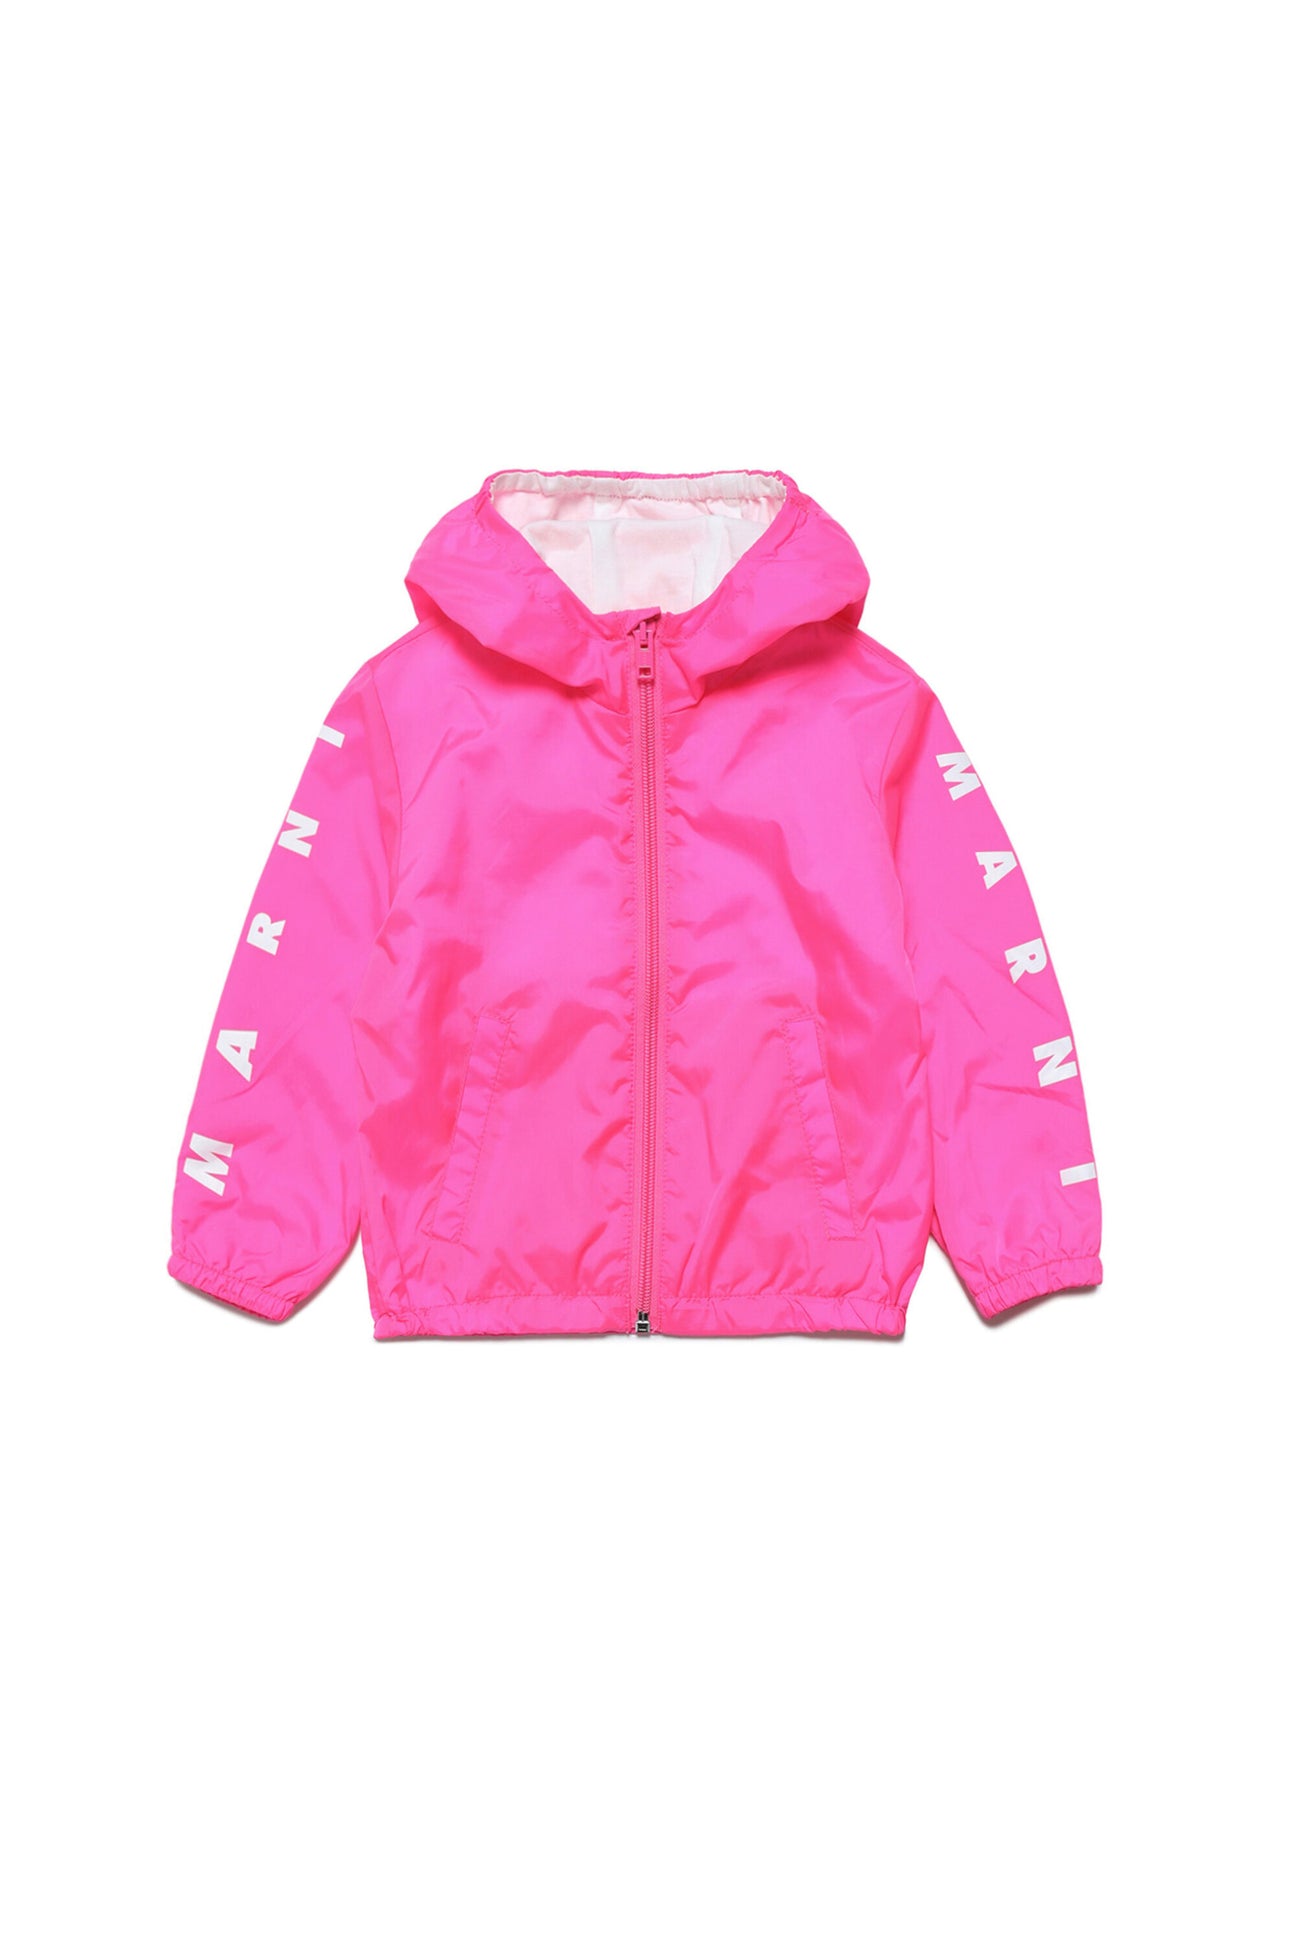 Fluo pink waterproof lined jacket with hood, zip and logo on the sleeves 